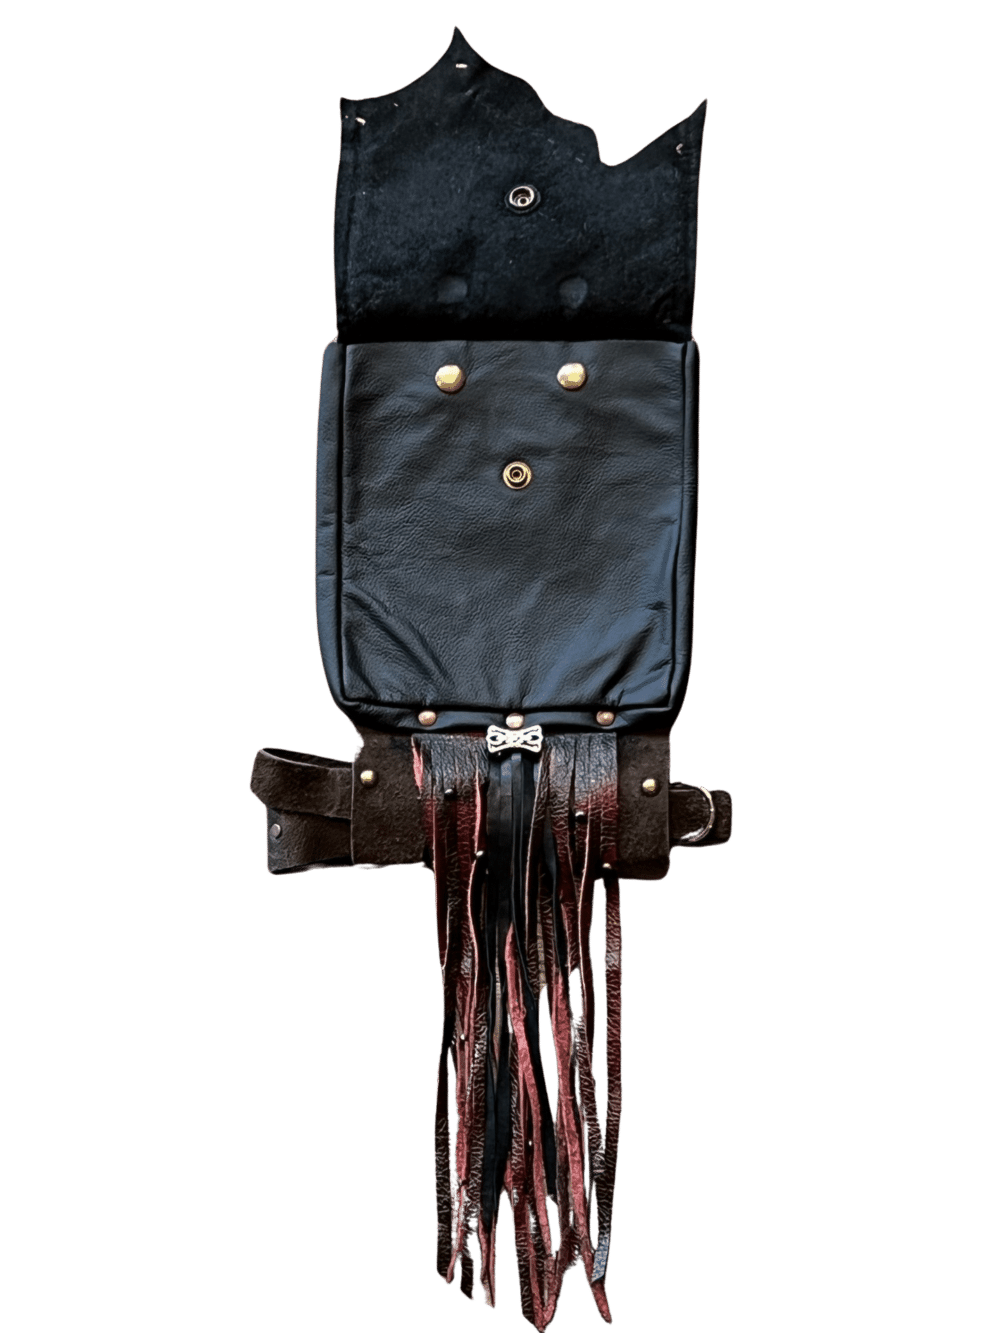 A Black Leather Thigh Bag that slides onto a belt. The bottom strap of the holster wraps around the thigh for support. One big pocket to keep all of your daily essentials.